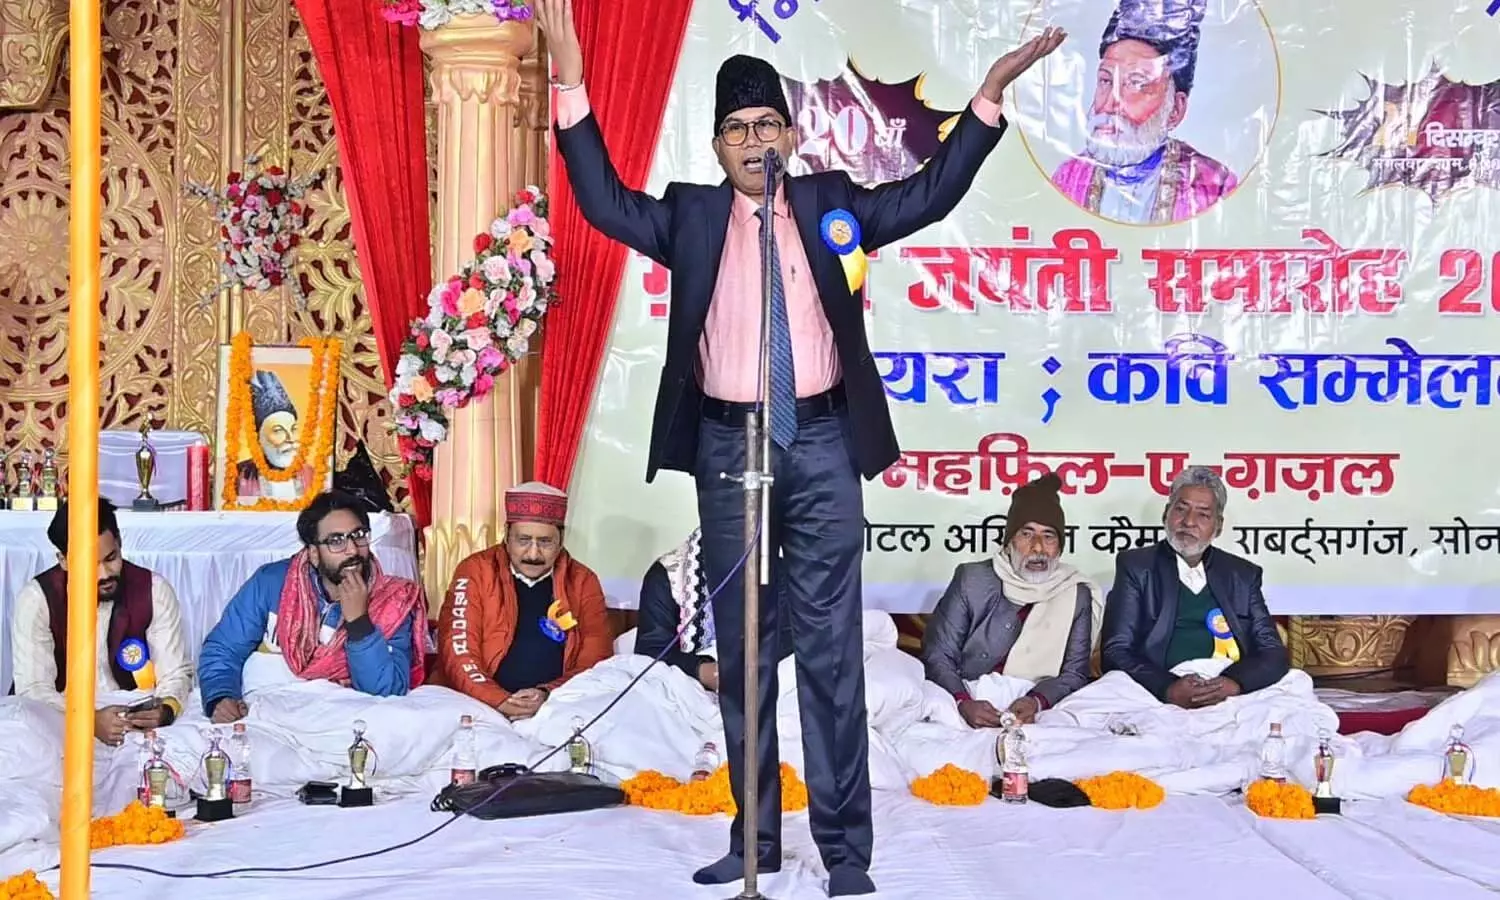 On the occasion of Ghalib Jayanti, a gathering of poetry and poems was organized at the district headquarters in Sonbhadra.